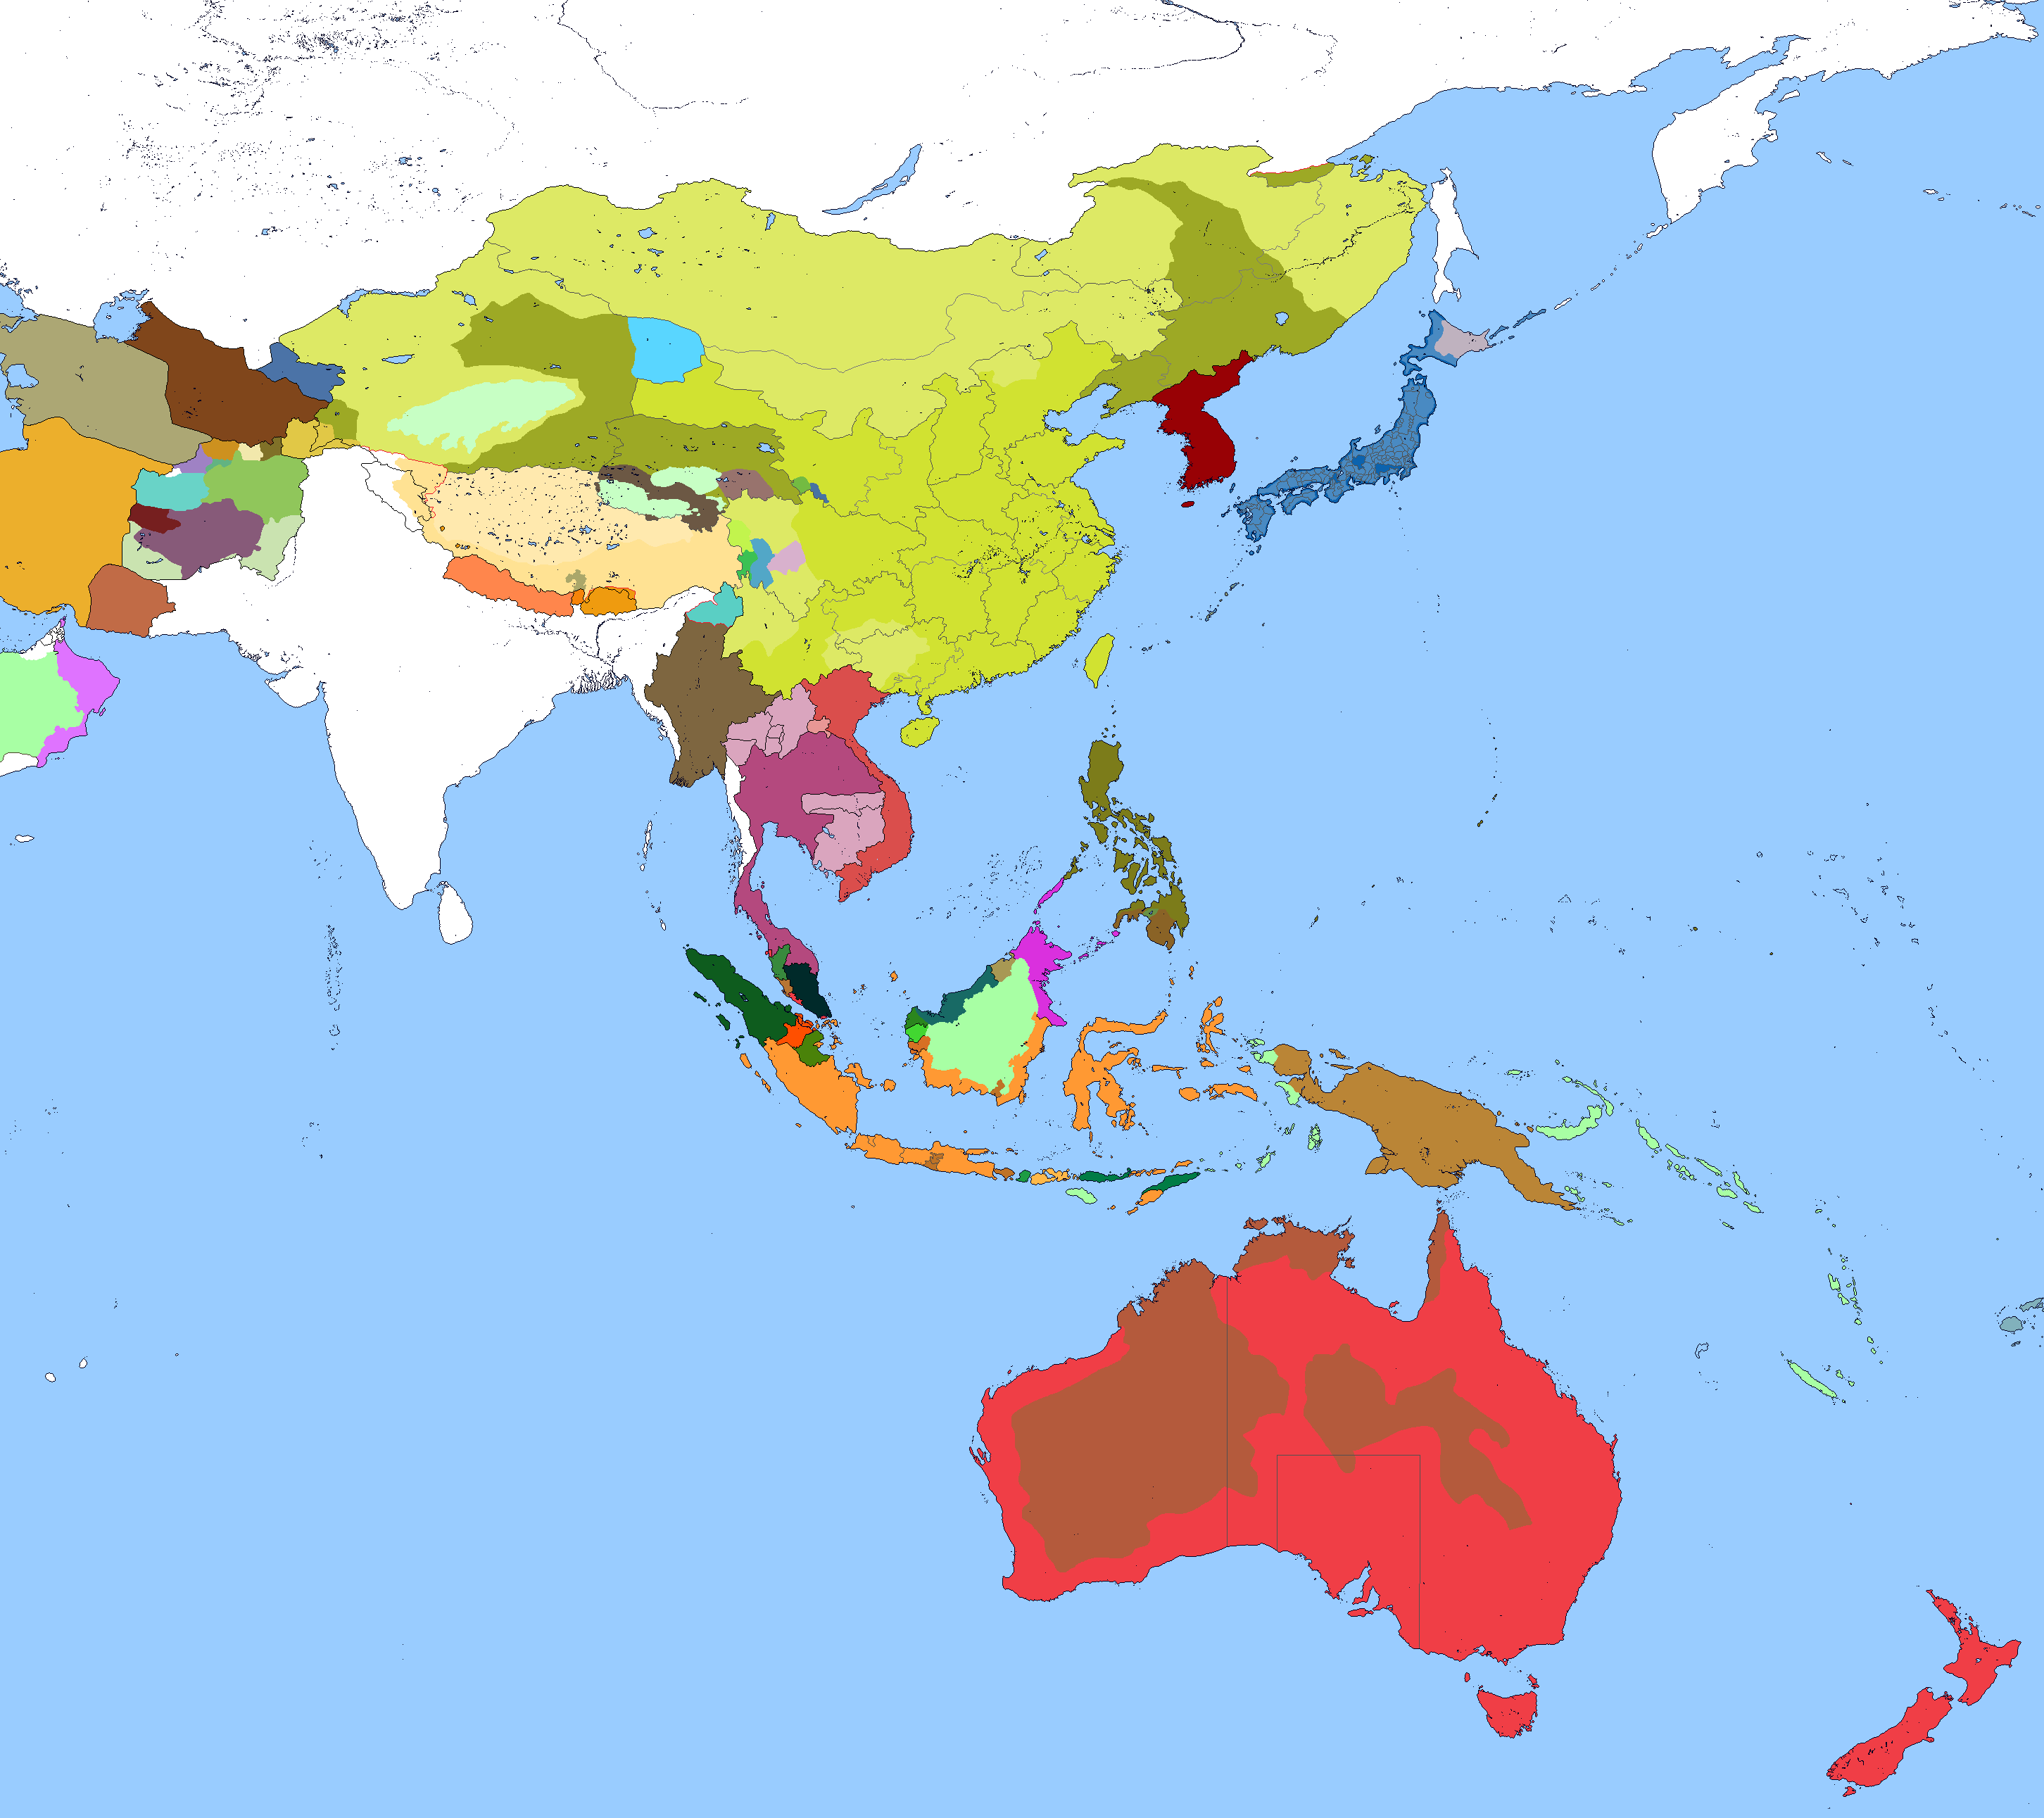 Asia 1850 map.png